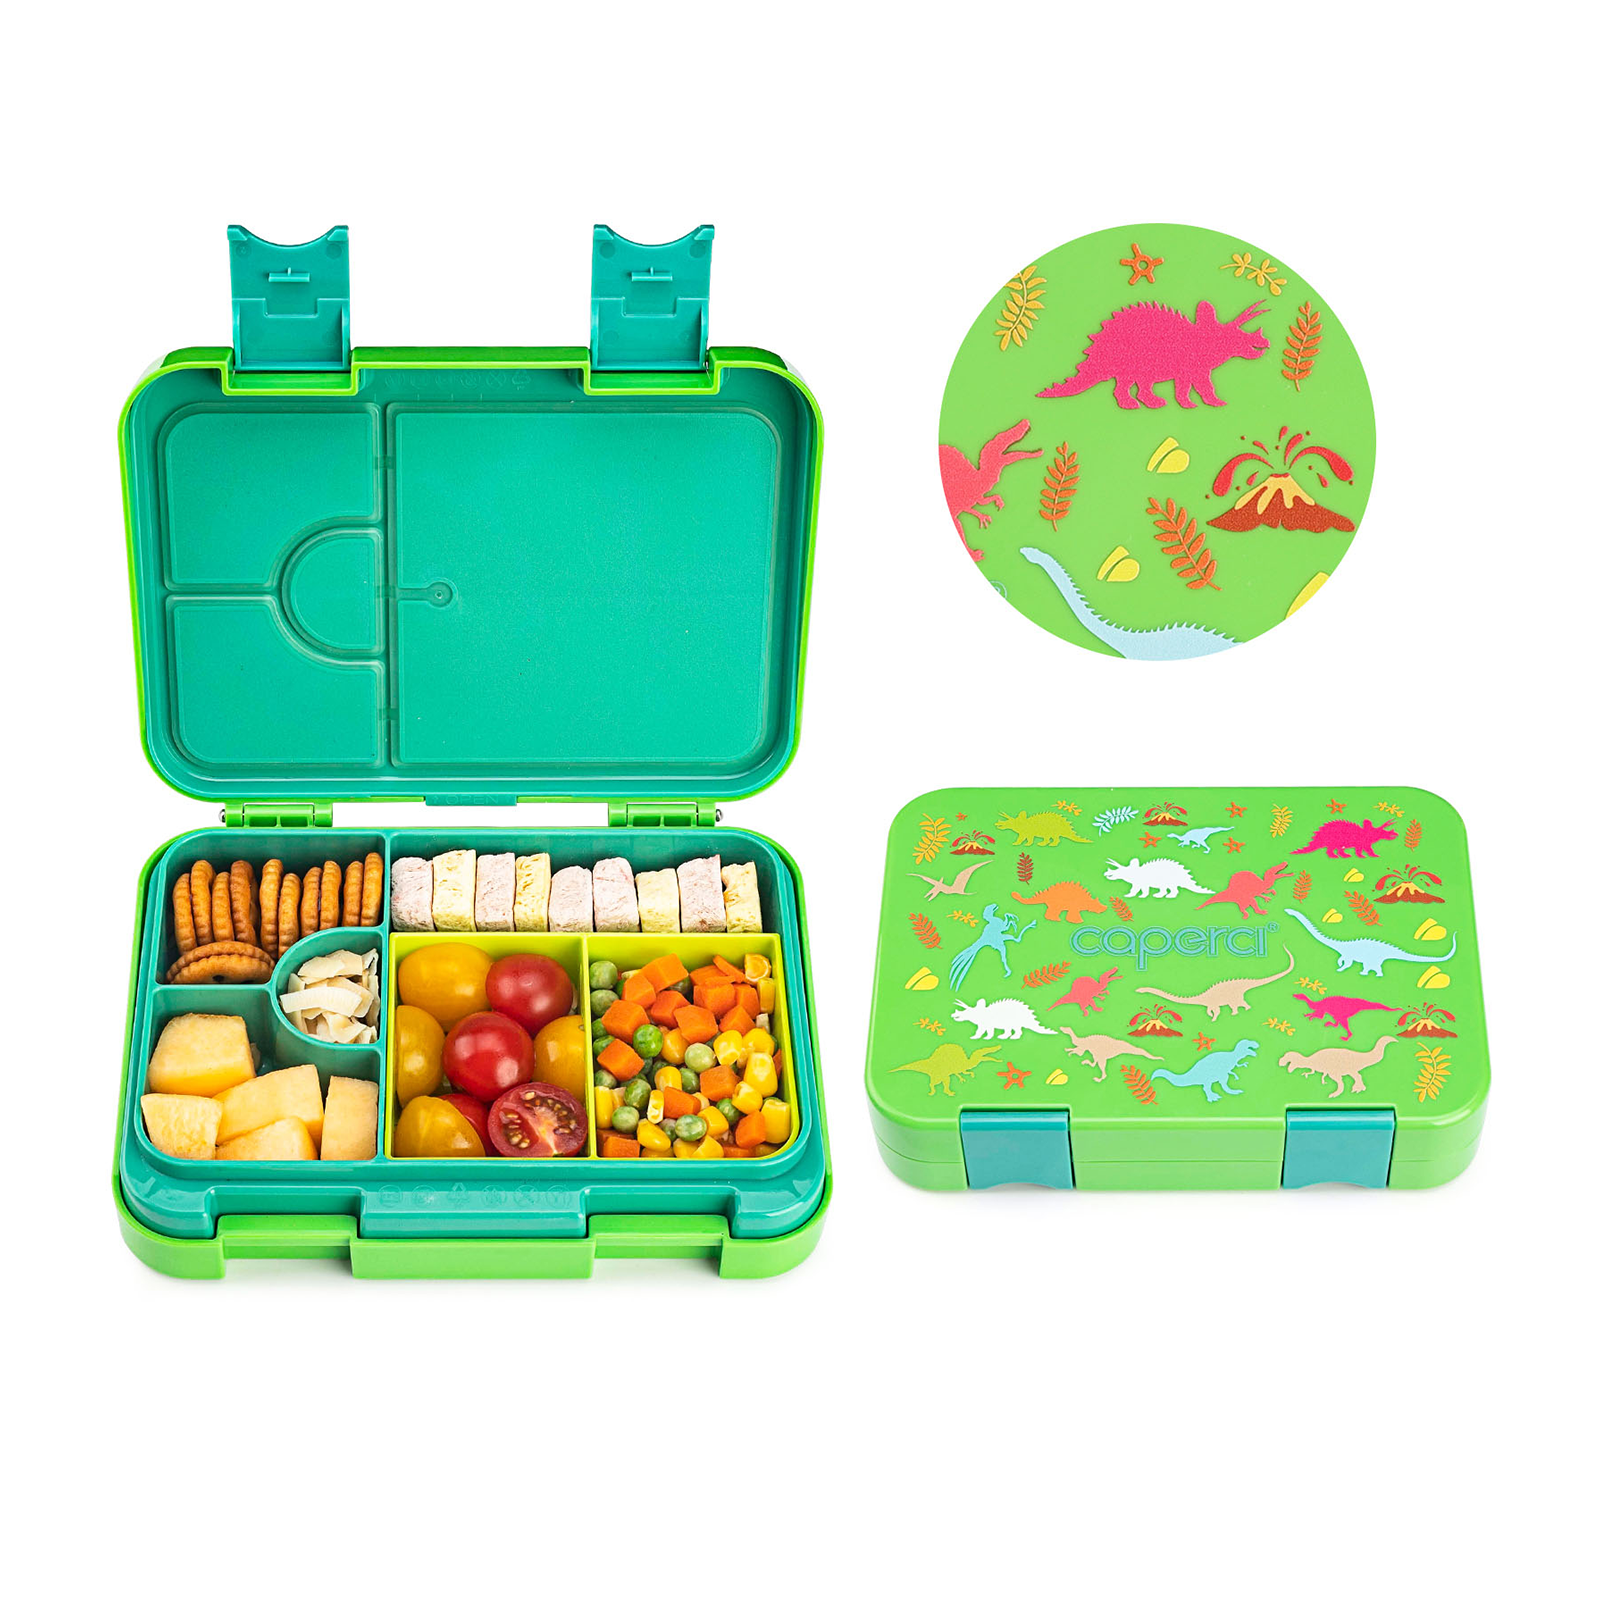 1pc Cartoon Dinosaur Shaped Bento Box For Household Meal Portioning,  Refrigerating, Freezing And Fresh Keeping, Suitable For Office Workers And  Fruit Carrying Out